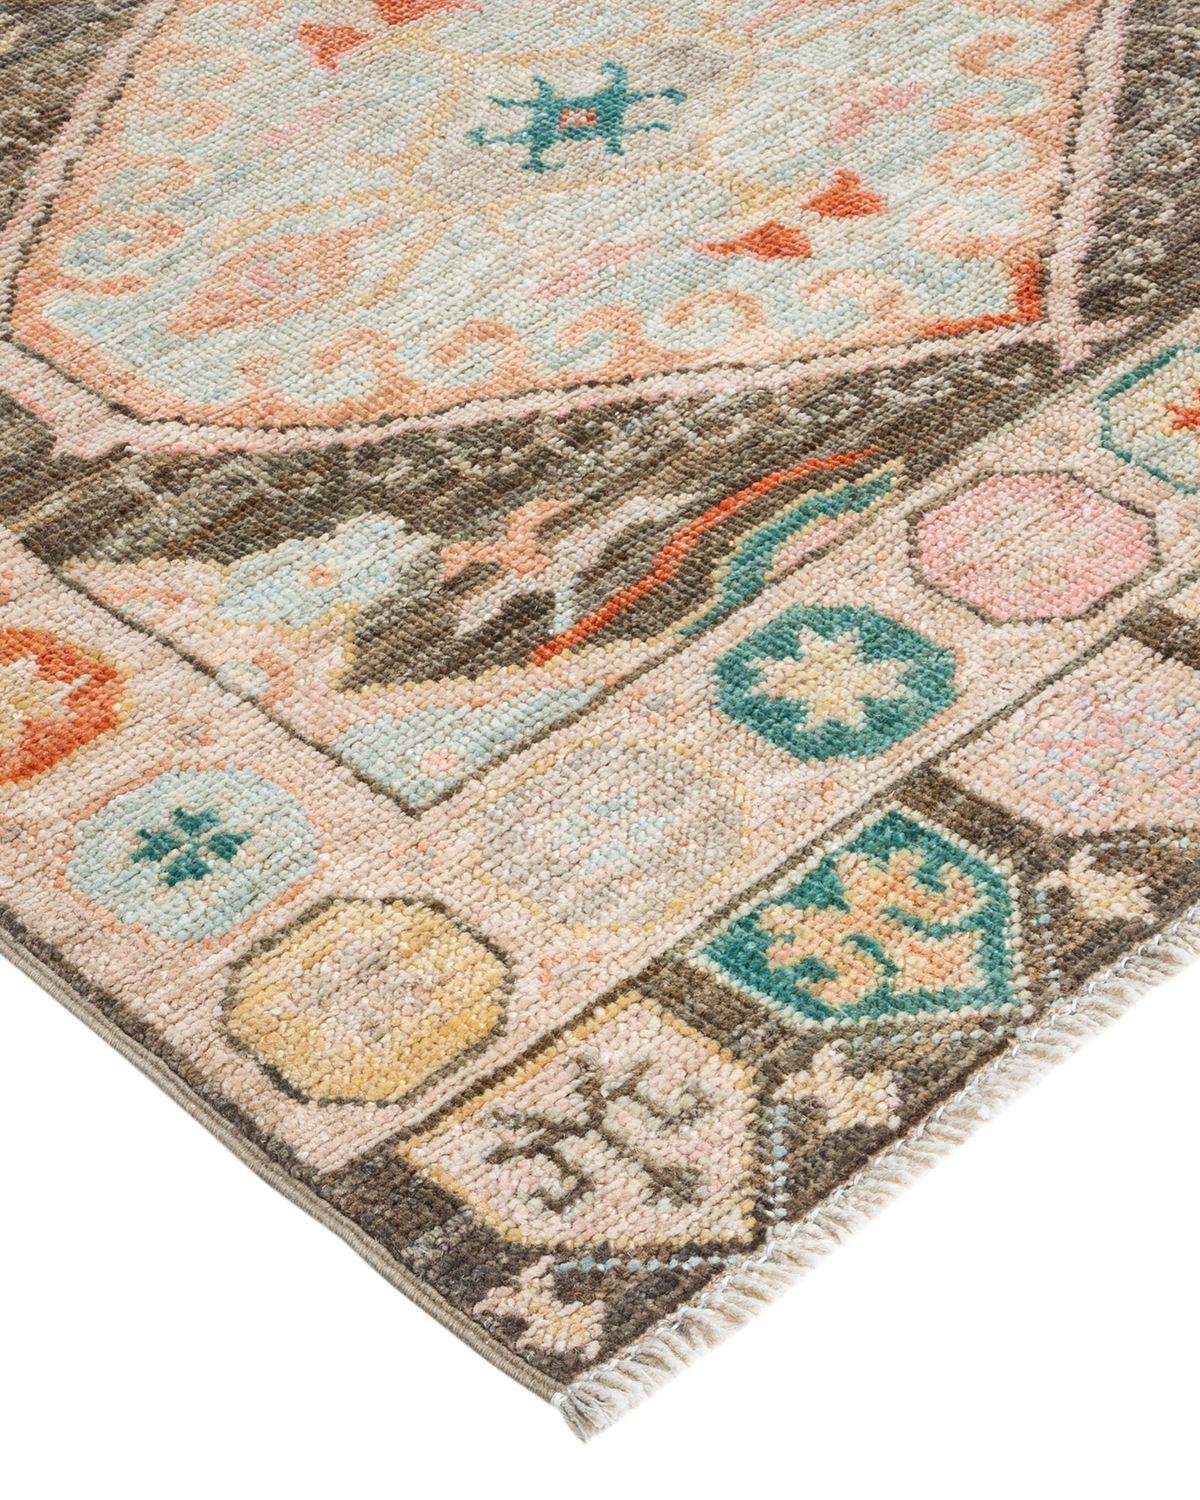 The rich textile tradition of western Africa inspired the Tribal collection of hand knotted rugs. Incorporating a medley of geometric motifs, in palettes ranging from earthy to vivacious, these rugs bring a sense of energy as well as plush texture